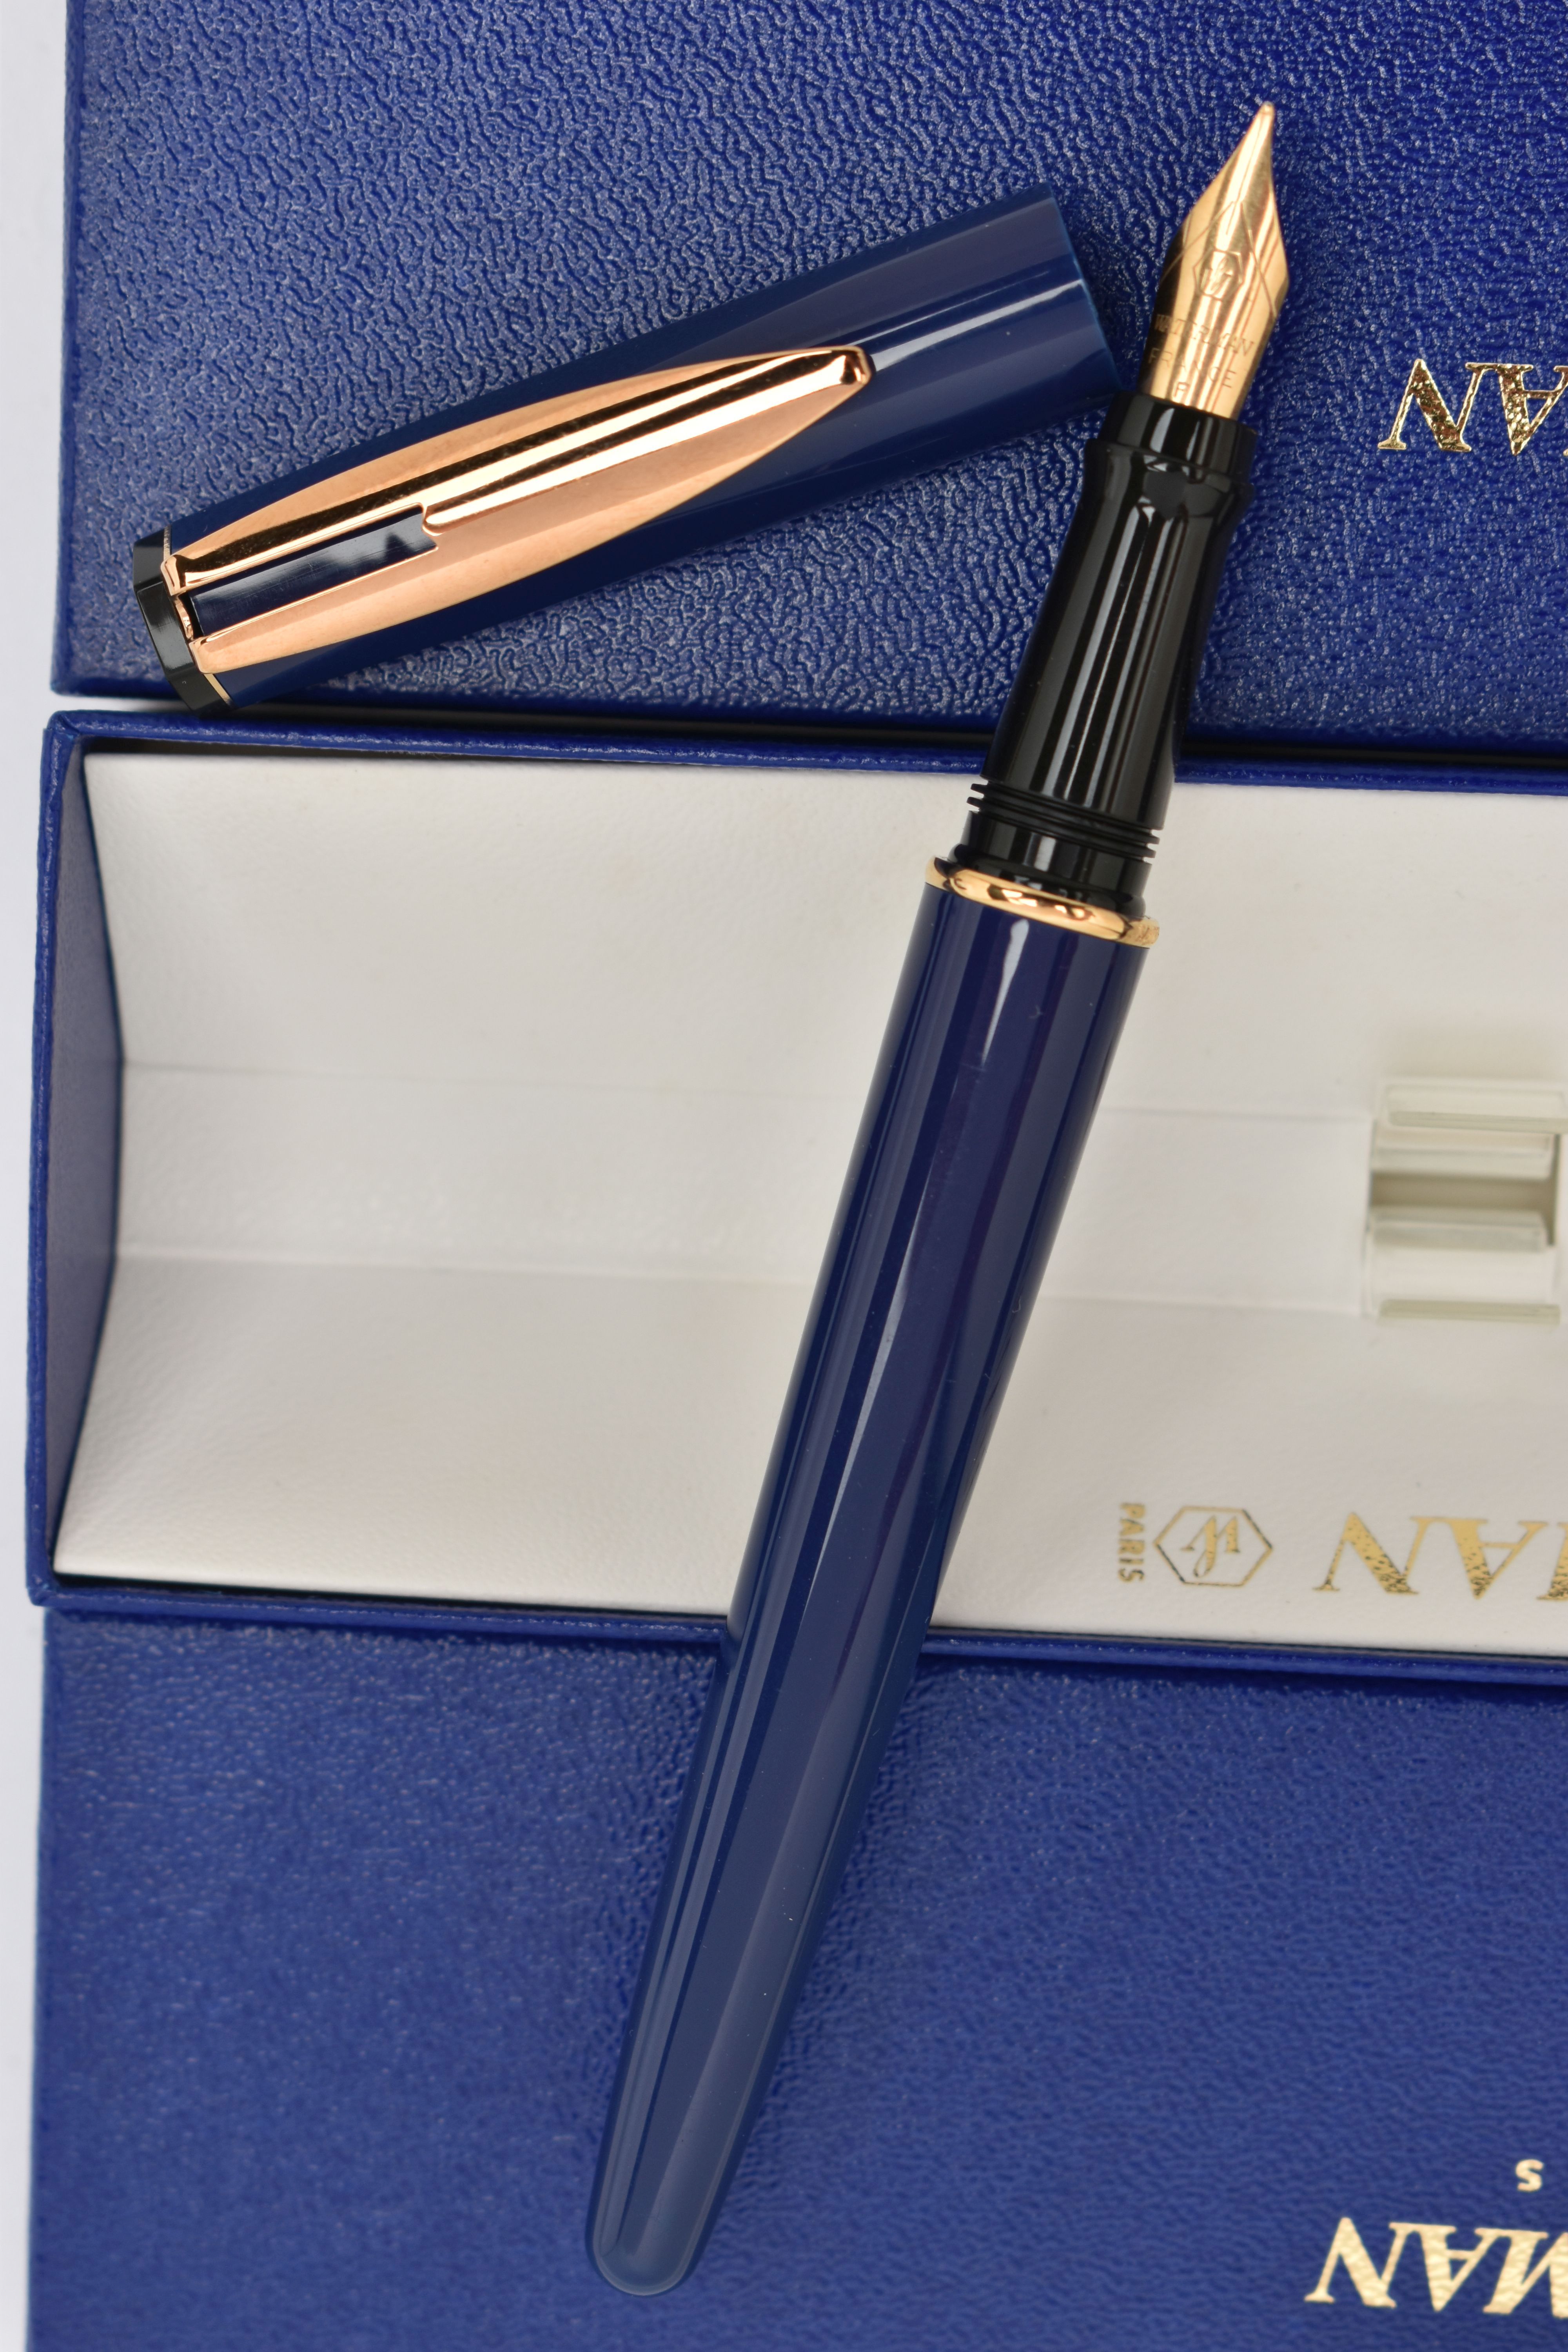 TWO BOXED 'WATERMAN' FOUNTAIN PENS, blue lacquer pens, signed to each collar 'Waterman', both fitted - Image 4 of 5